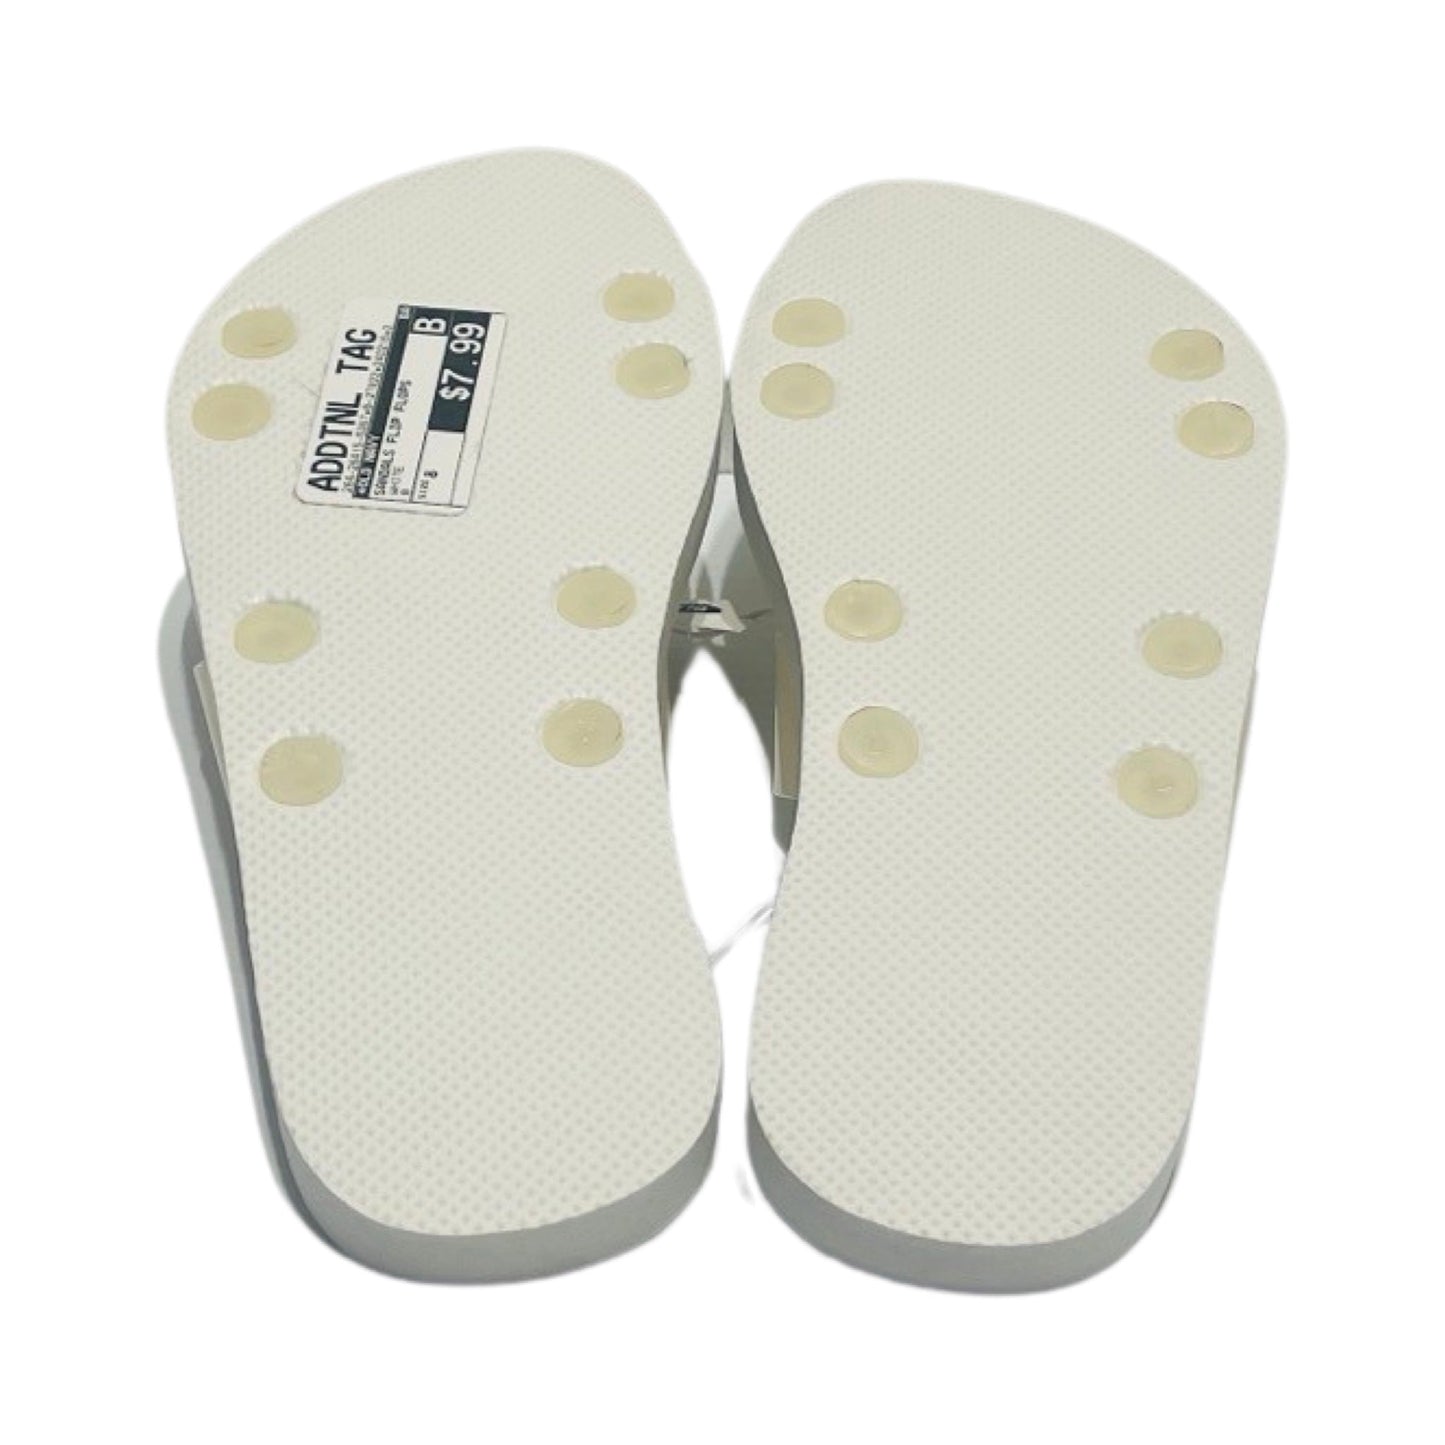 NWT White Sandals Flip Flops By Old Navy  Size: 8